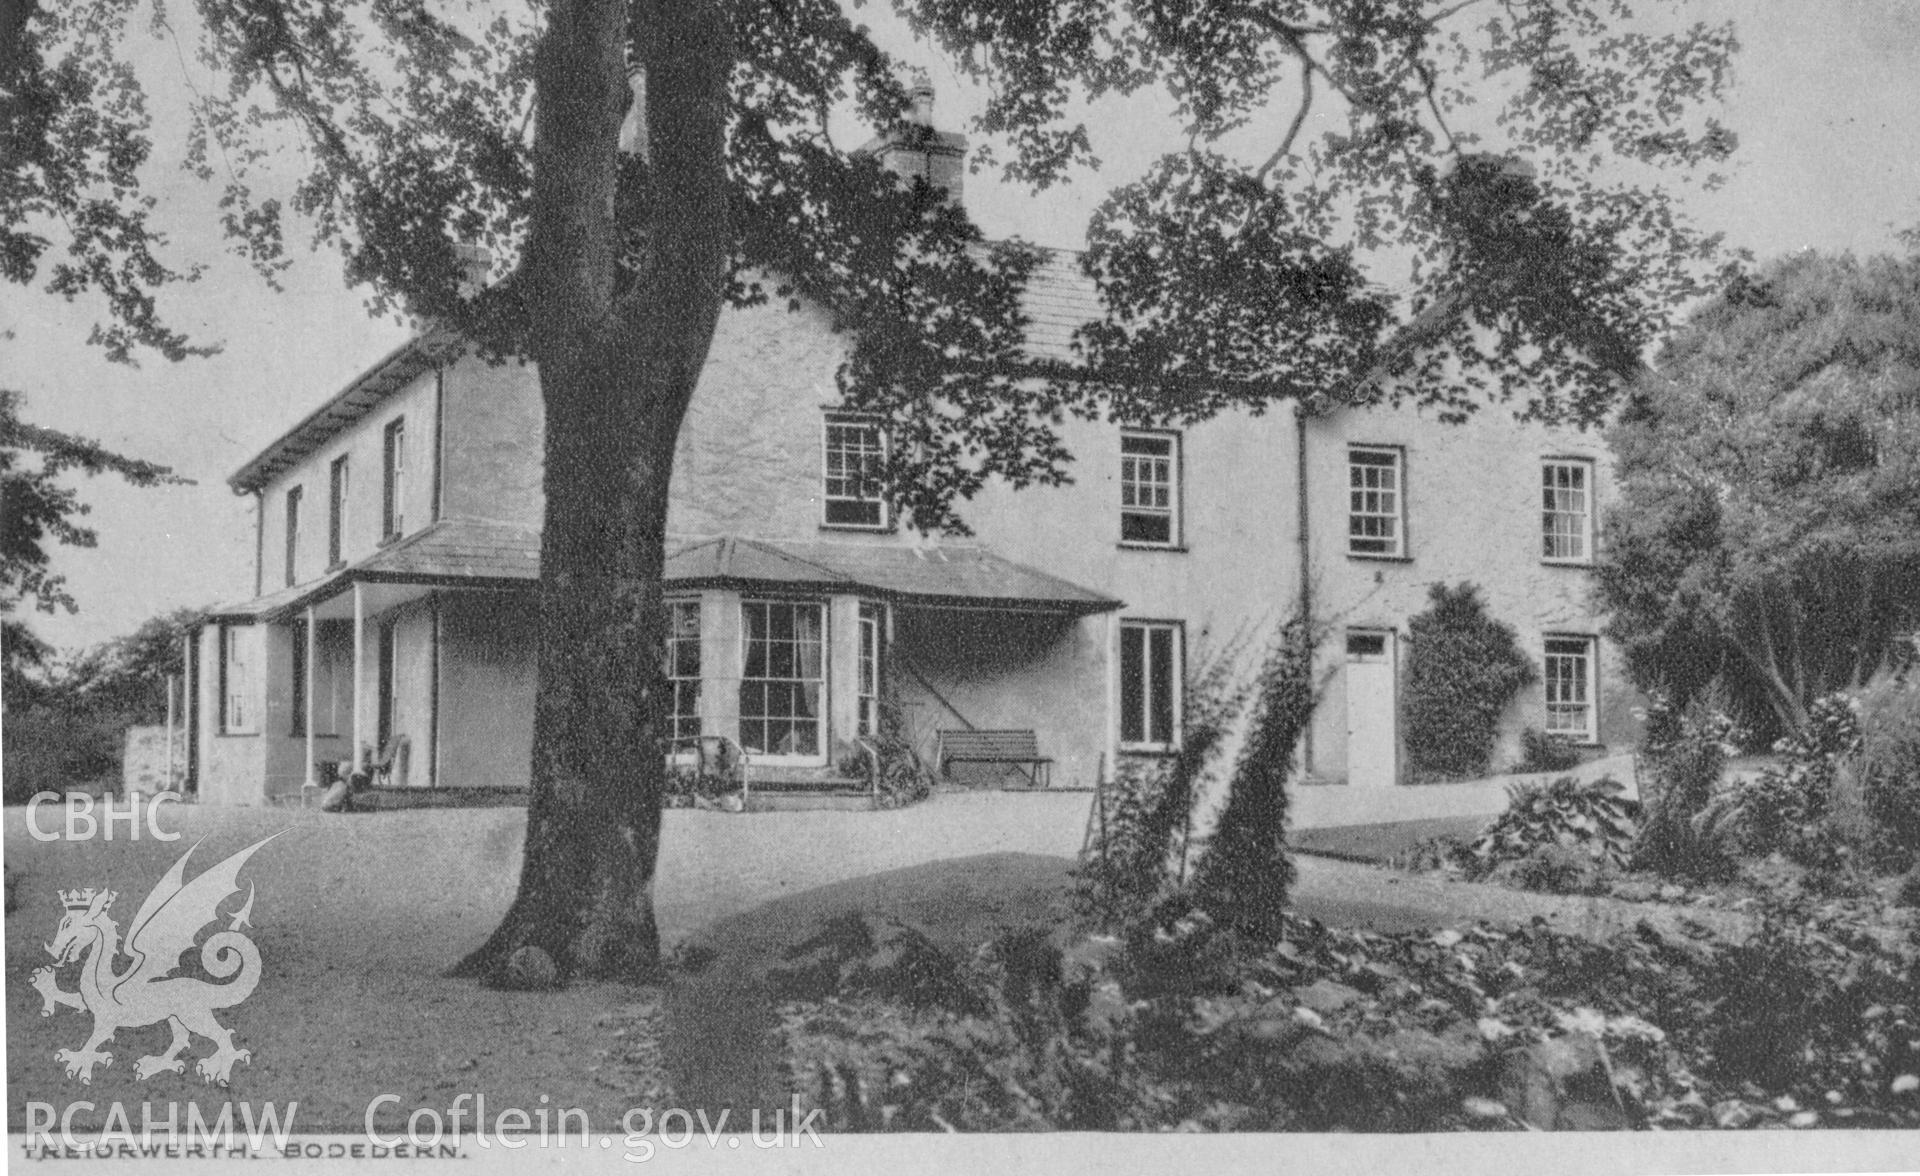 Treiorwerth, Bodedern; b&w photograph copied from an undated postcard published by O. Williams & Co, loaned for copying by Thomas Lloyd.